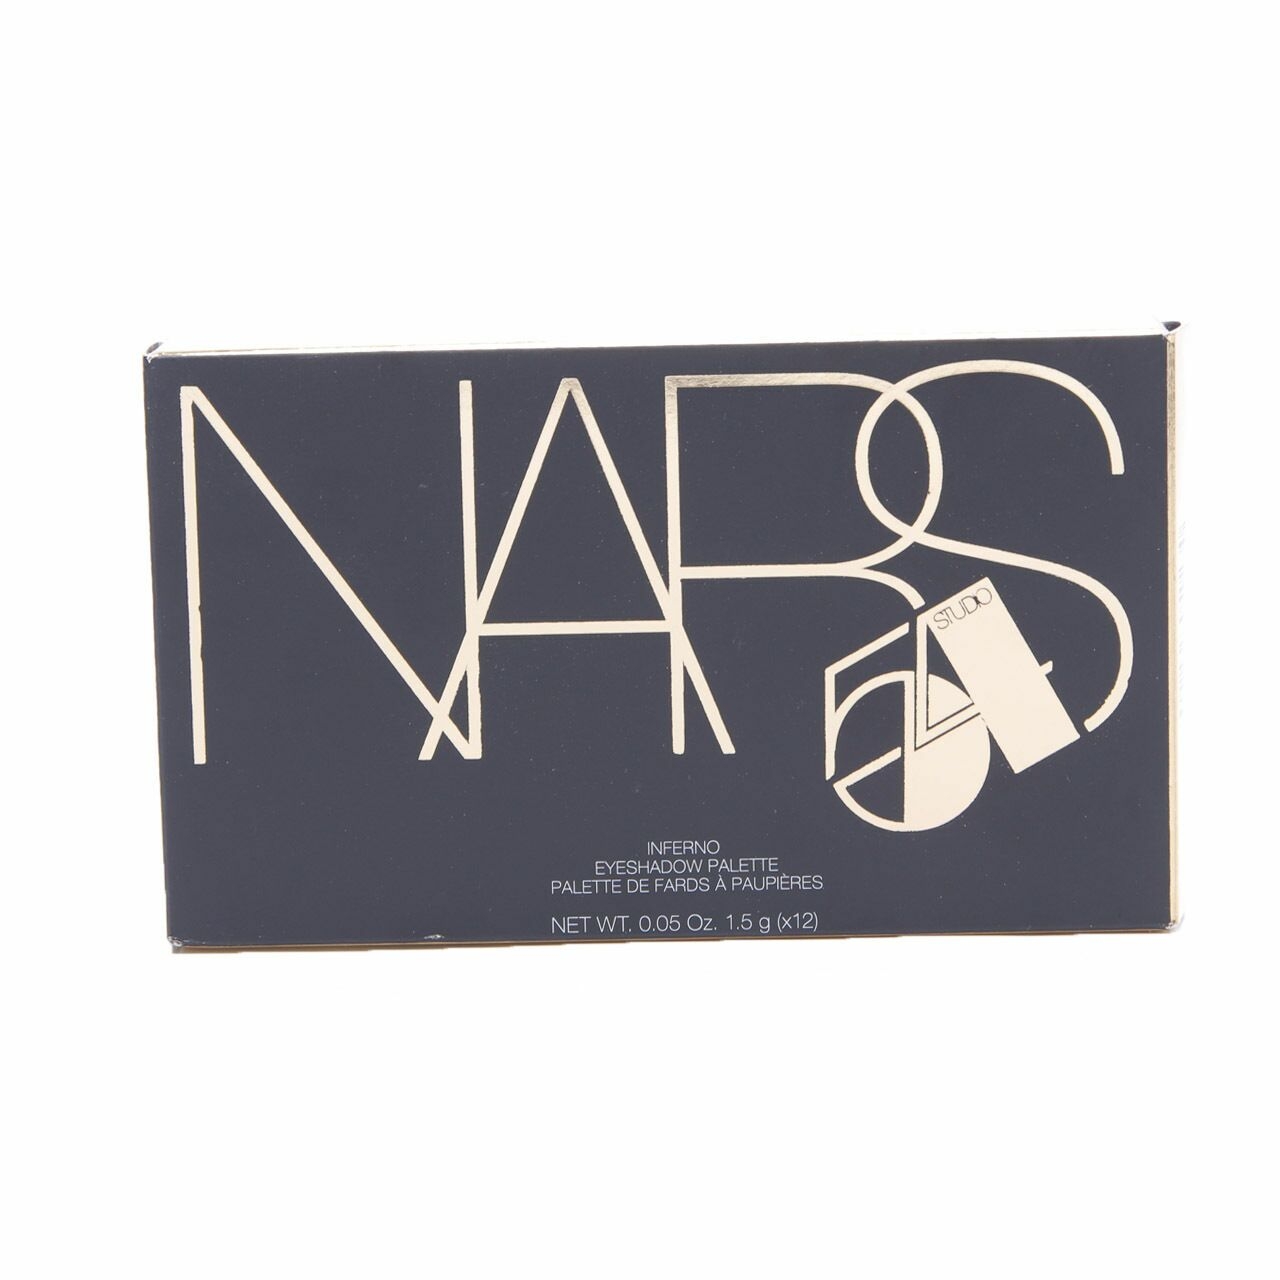 Nars Inferno Eyeshadow Sets and Palette